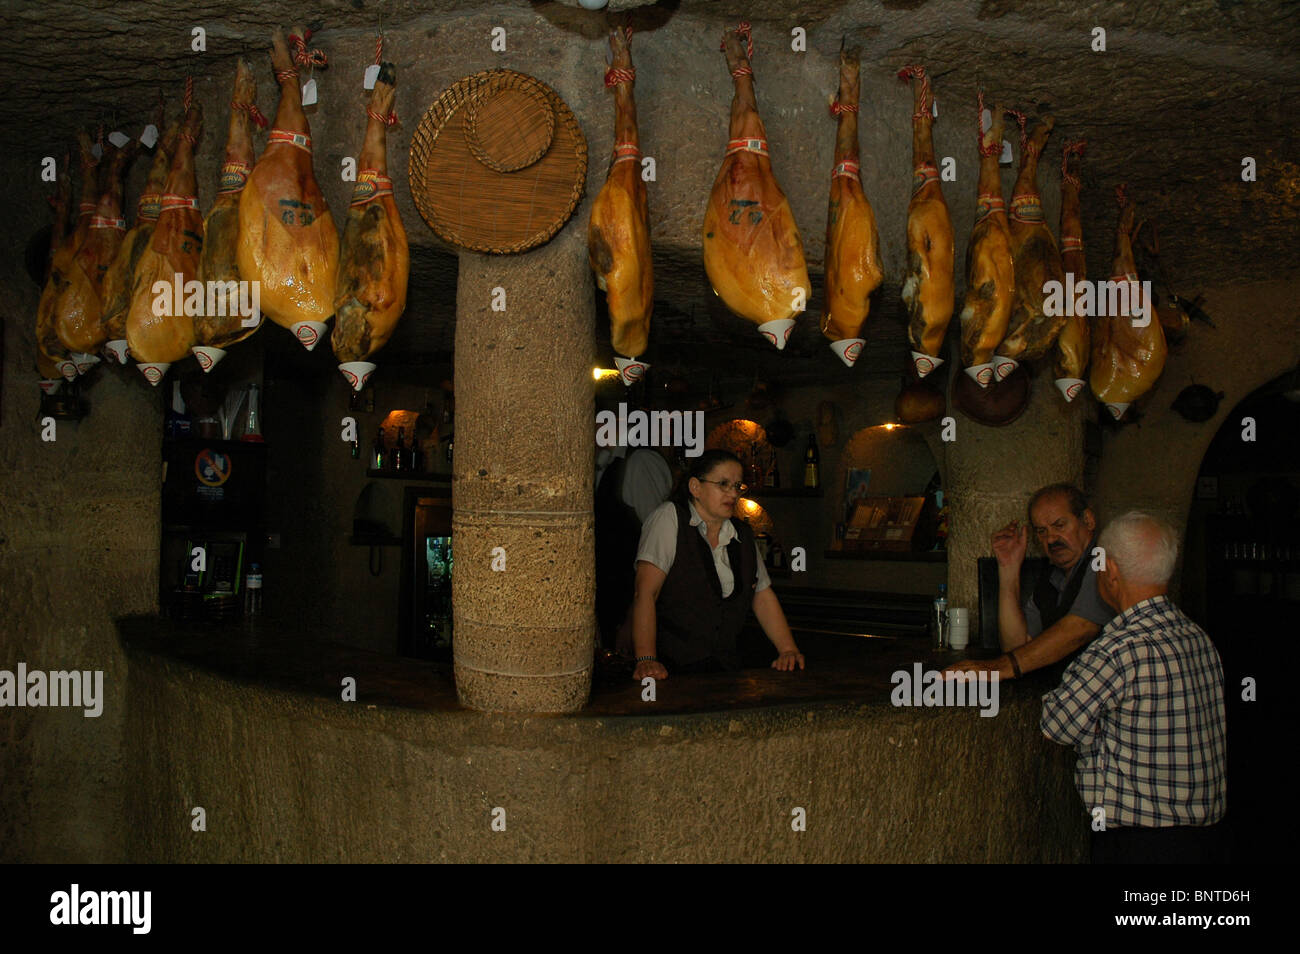 Jamon Serrano and Jamon Iberico hams hang in the bar restaurant Tagoror built inside a cave in Barranco de Guayadeque nature reserve in Gran Canaria island one of Spain’s Canary Islands Stock Photo